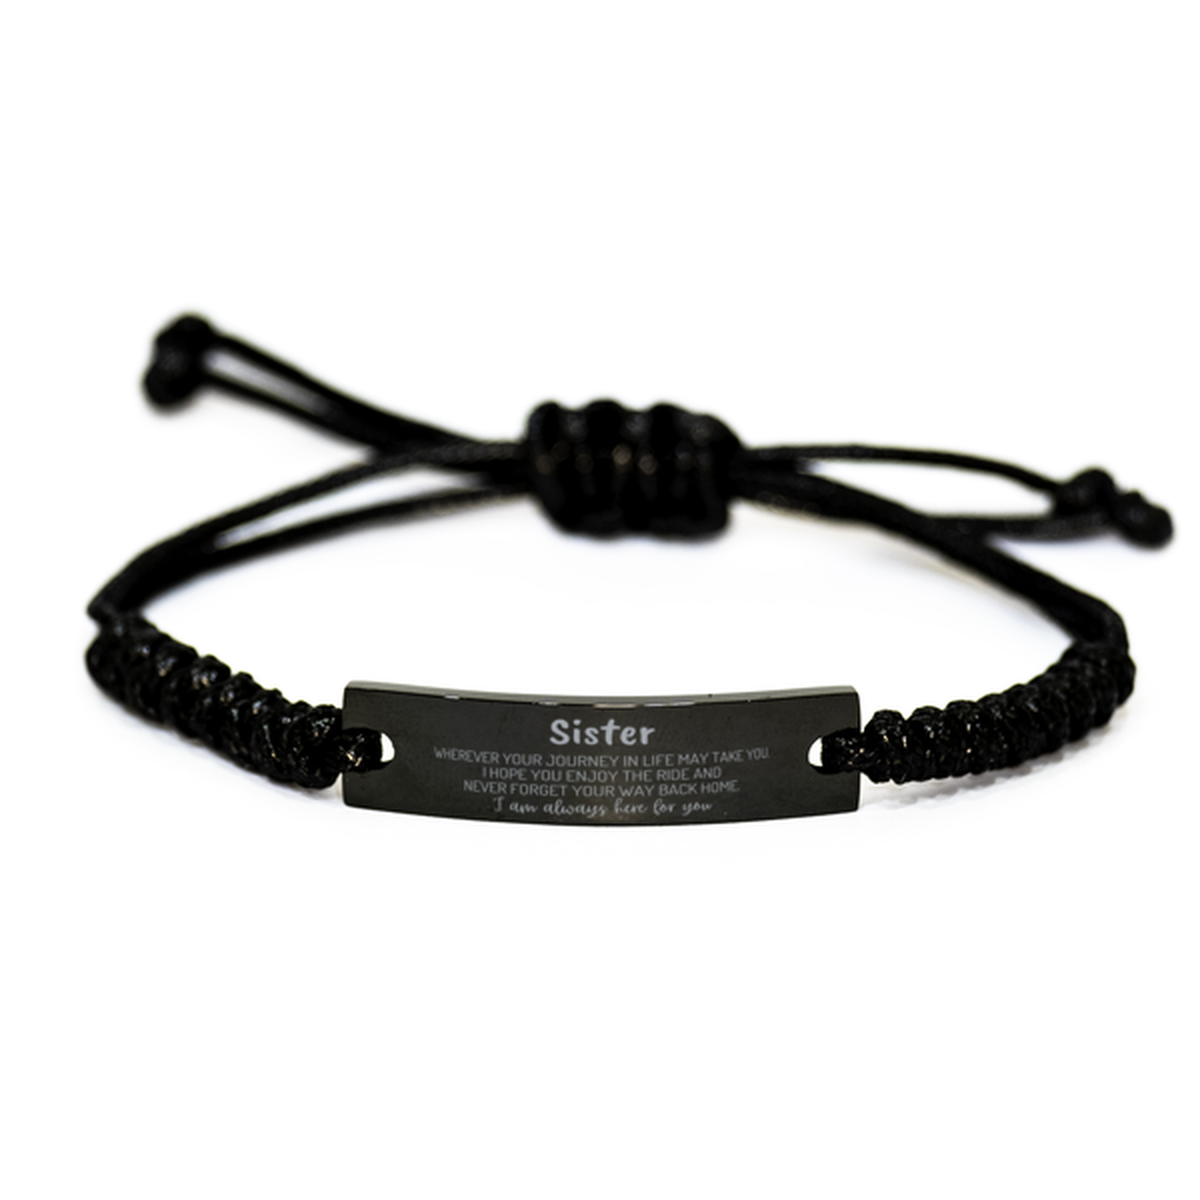 Sister wherever your journey in life may take you, I am always here for you Sister Black Rope Bracelet, Awesome Christmas Gifts For Sister, Sister Birthday Gifts for Men Women Family Loved One